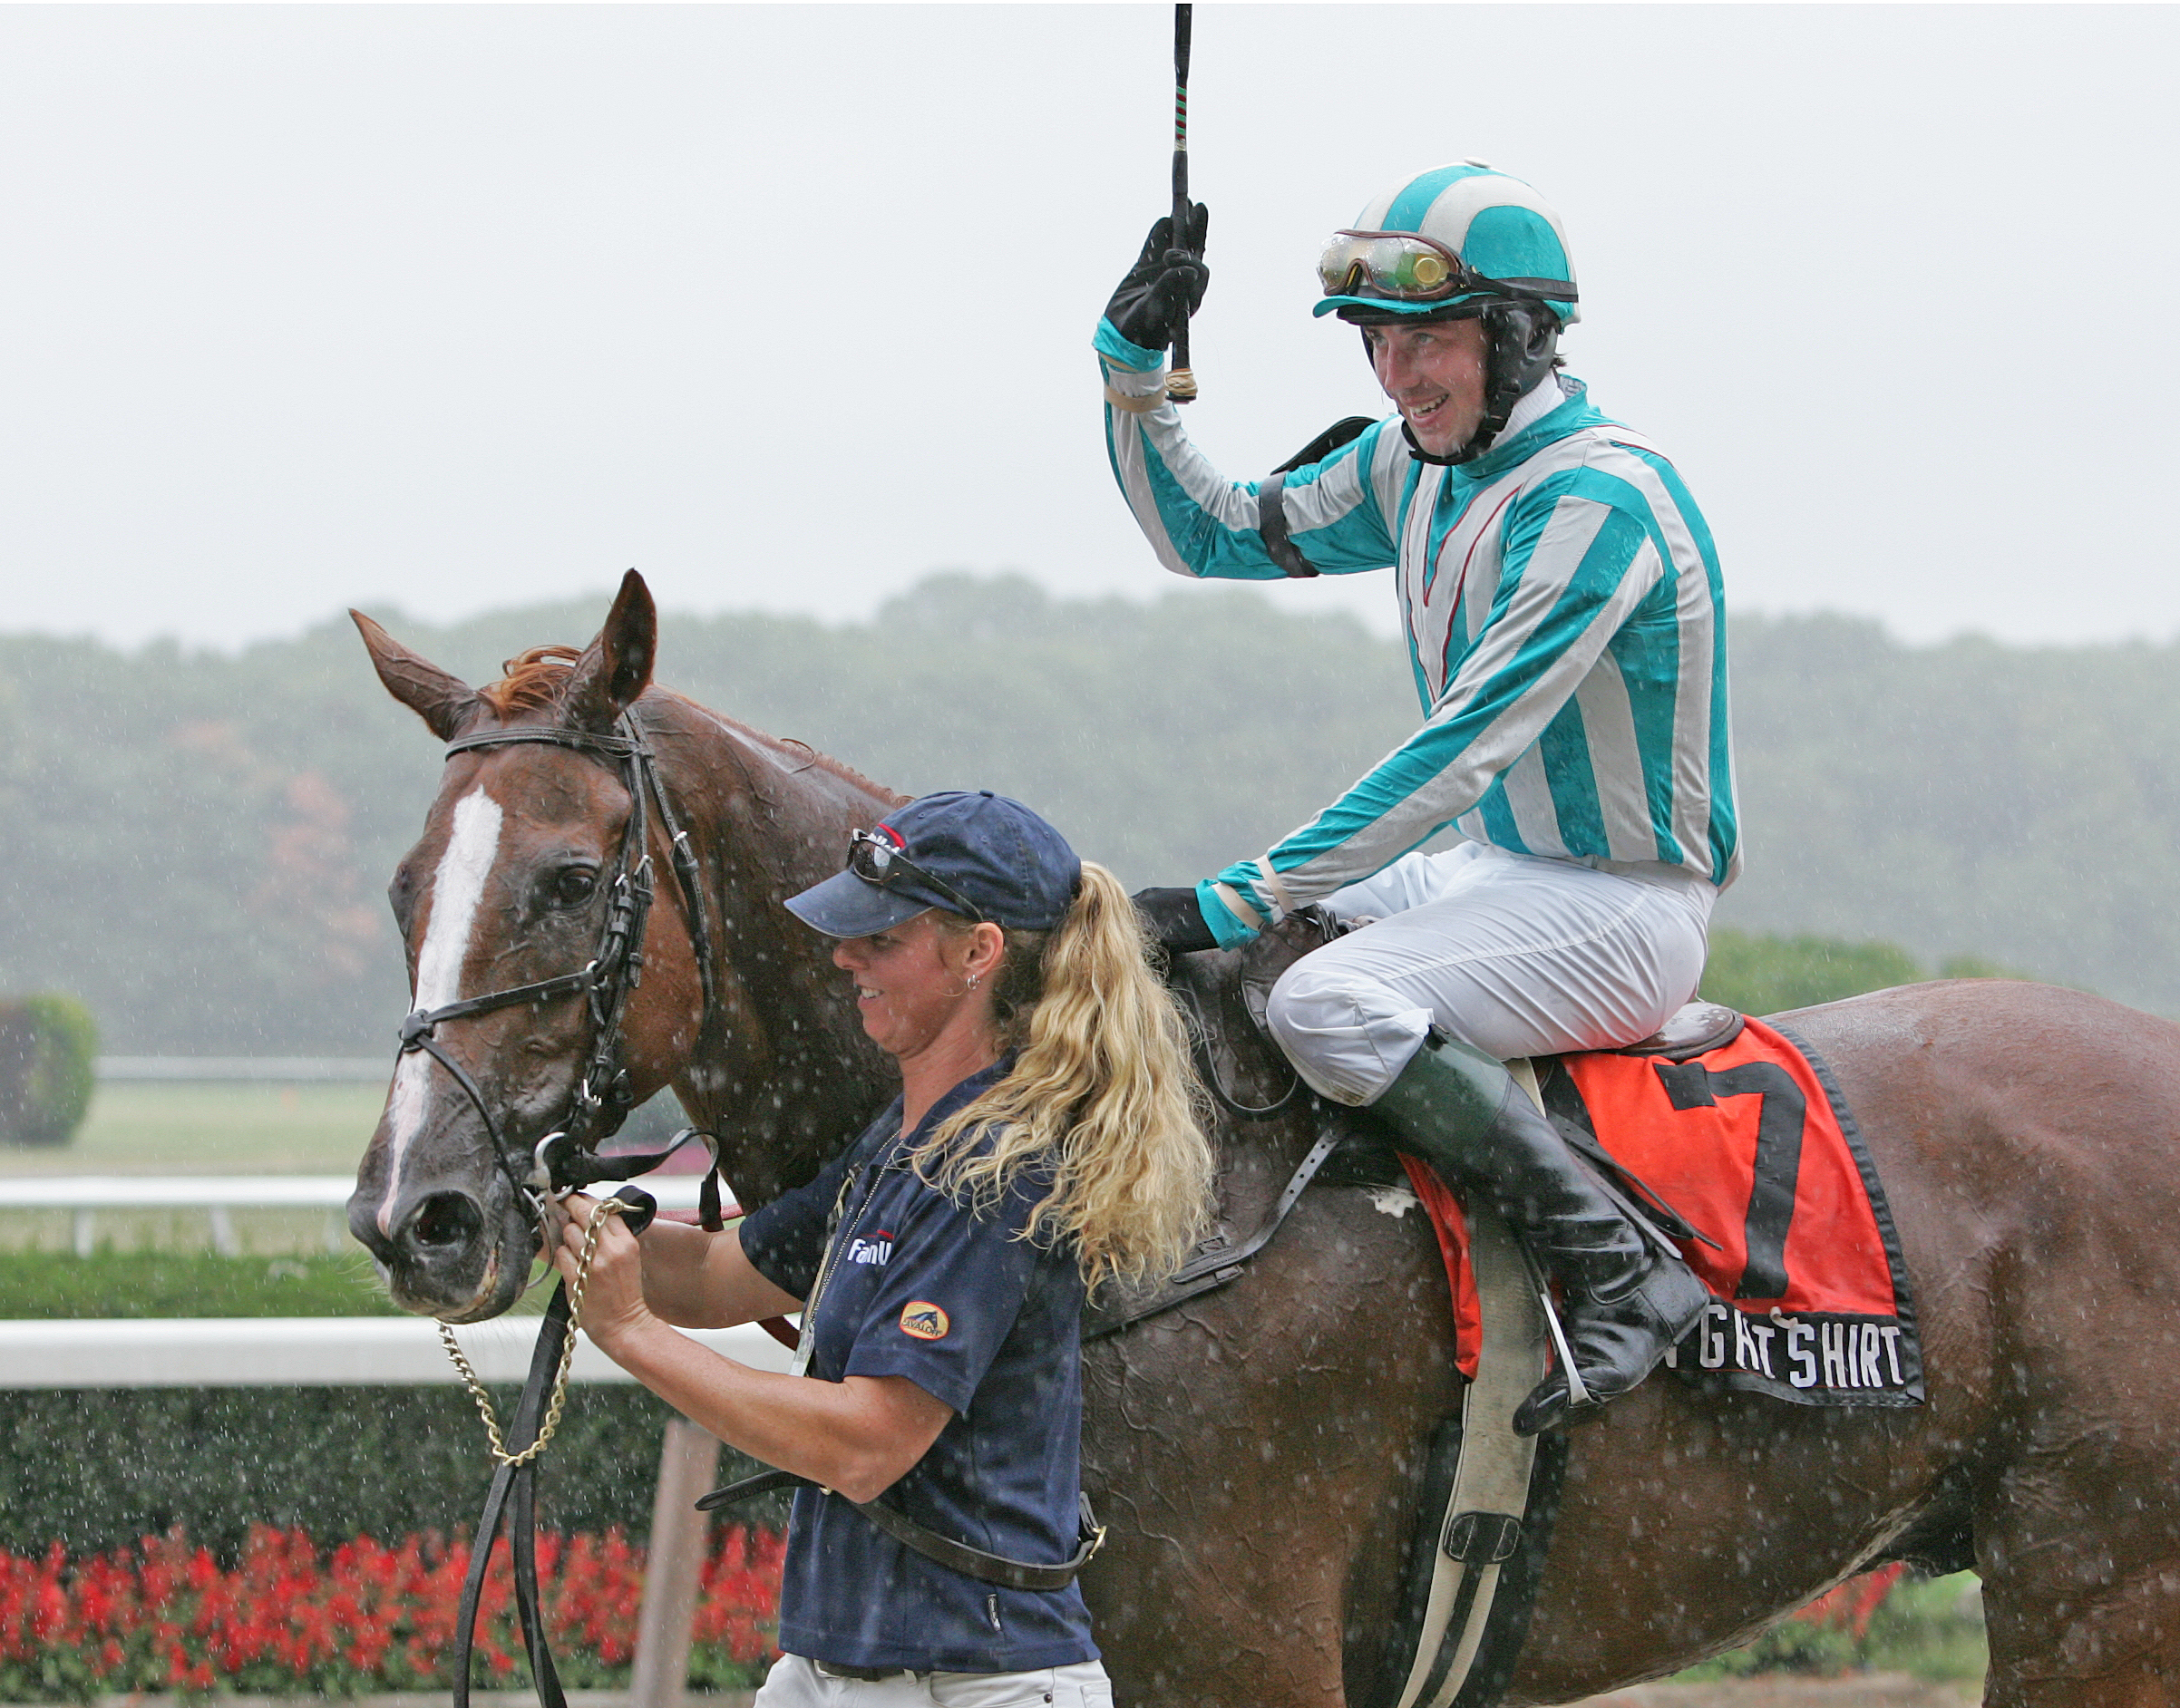 Good Night Shirt and Willy Dowling after winning the 2007 Lonesome Glory (Tod Marks)